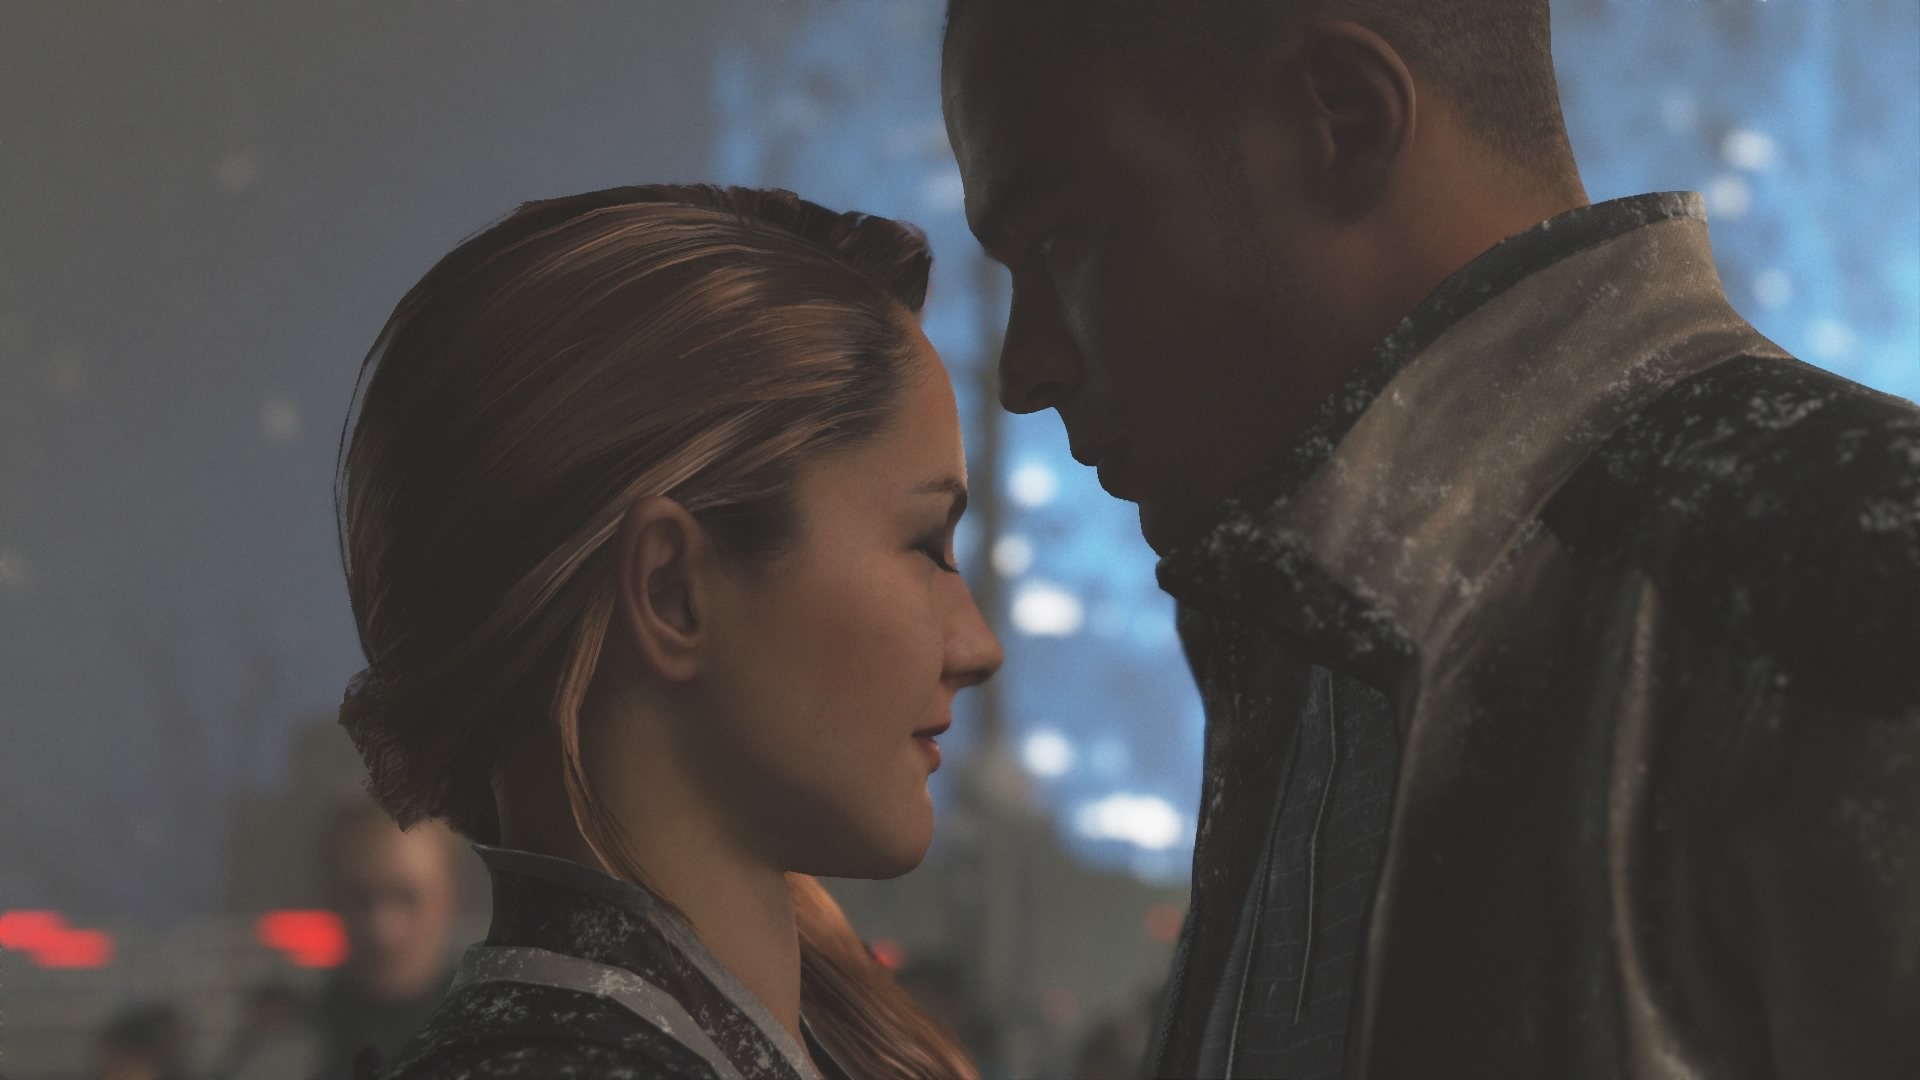 Detroit: Become Human – Will I be able to save them all